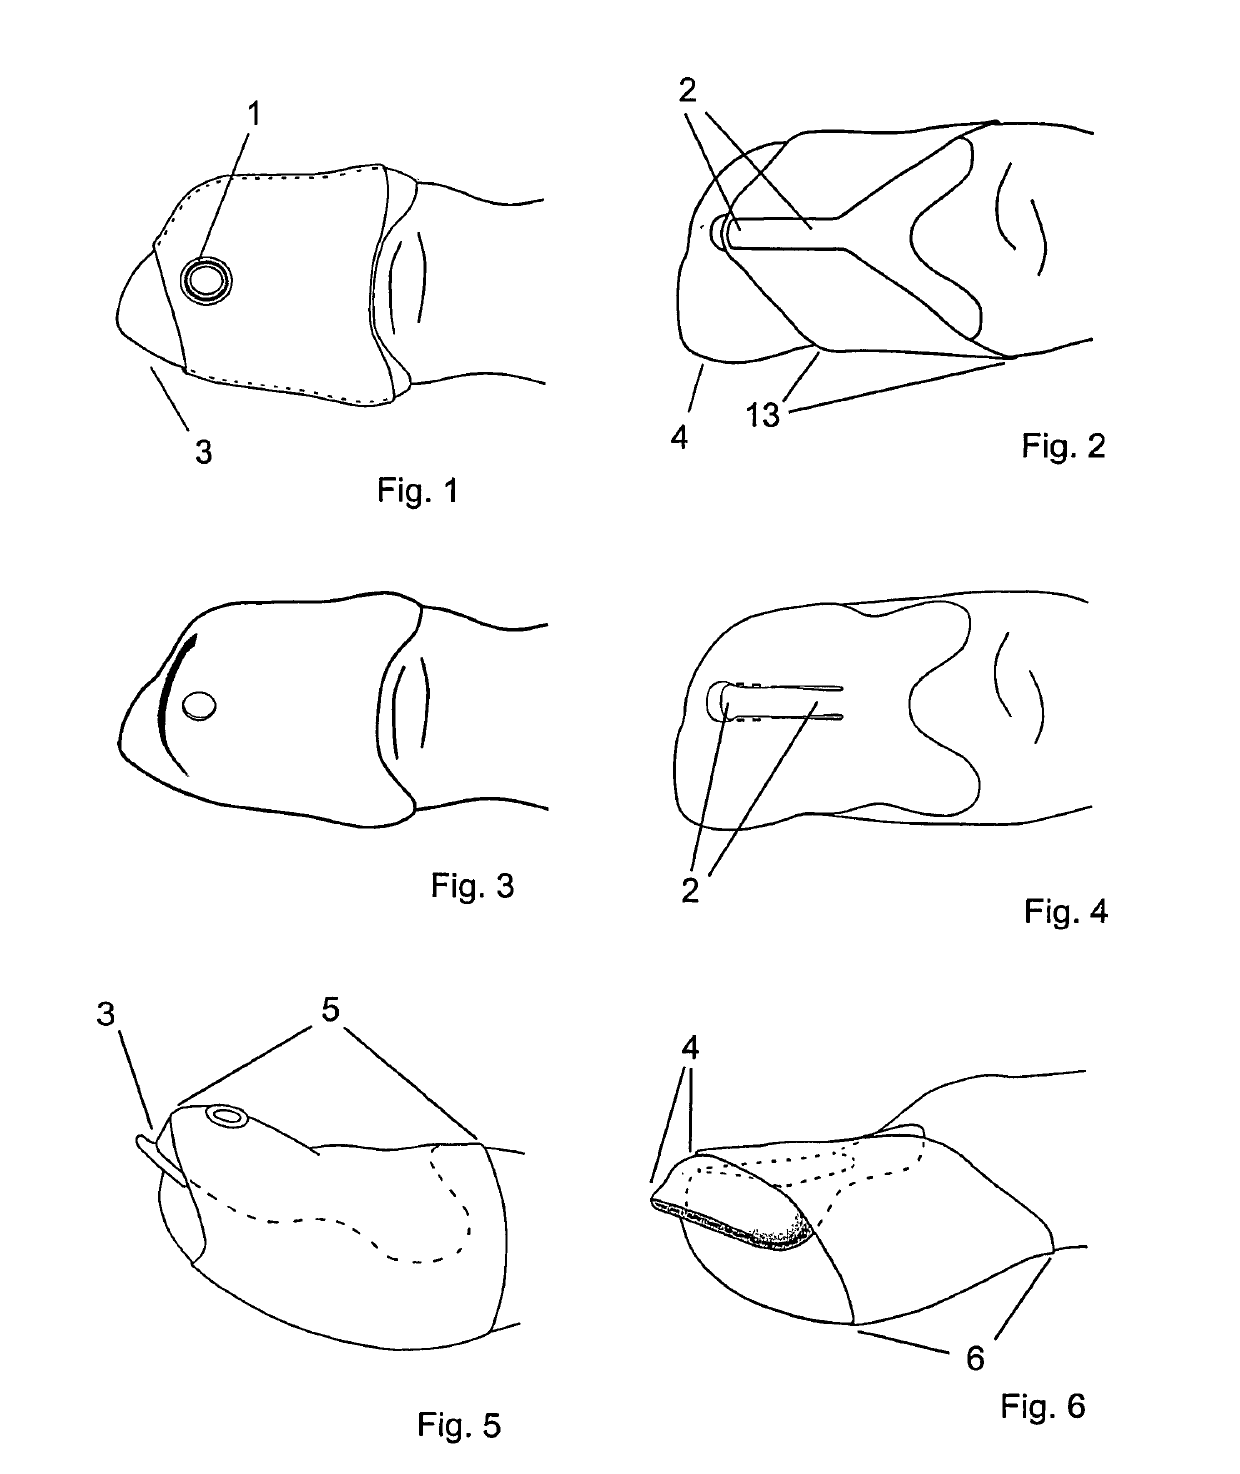 Contoured pick and a method of multiple variations of 3D CAD models